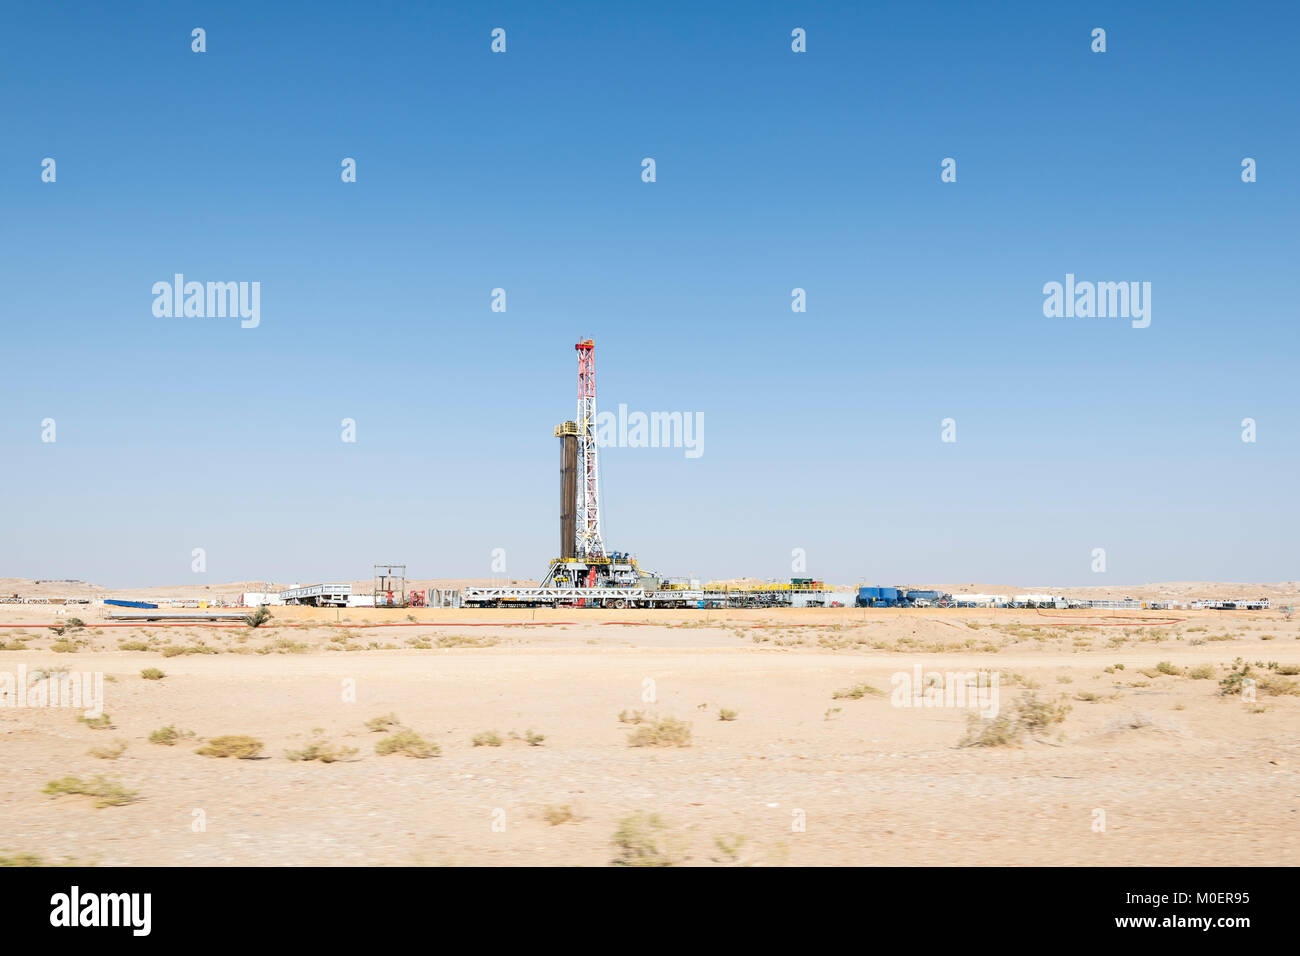 Gas or oil land drilling rig, Middle East, Arabian Peninsula Stock Photo